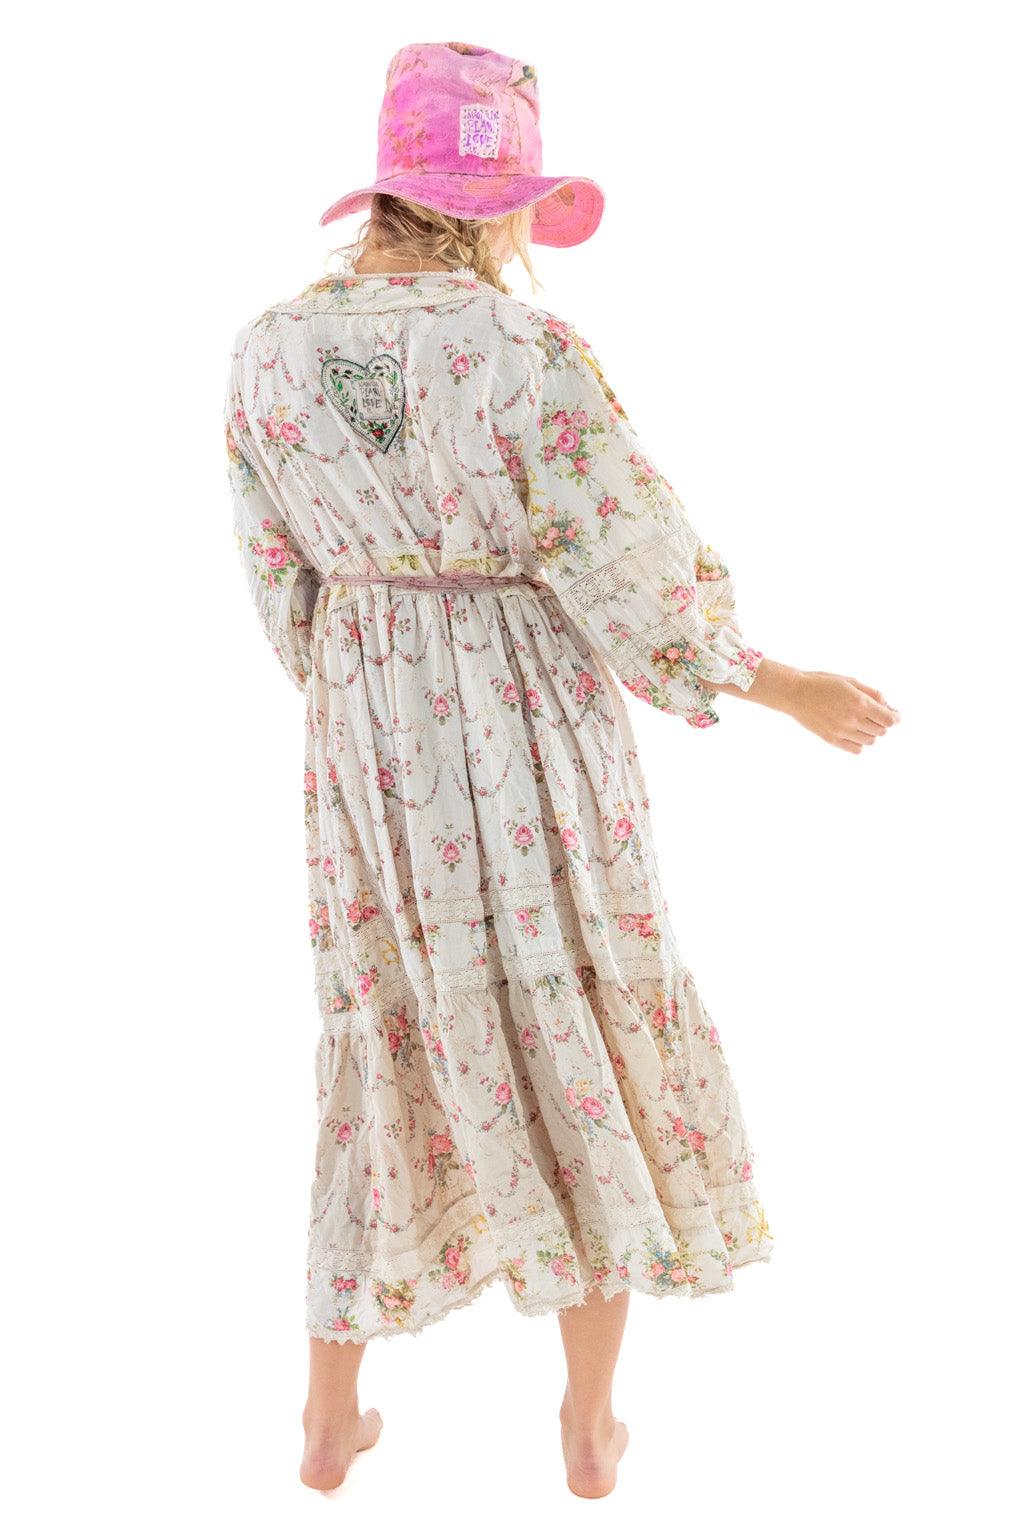 Patchwork Floral Chaney Dress - Magnolia Pearl Clothing